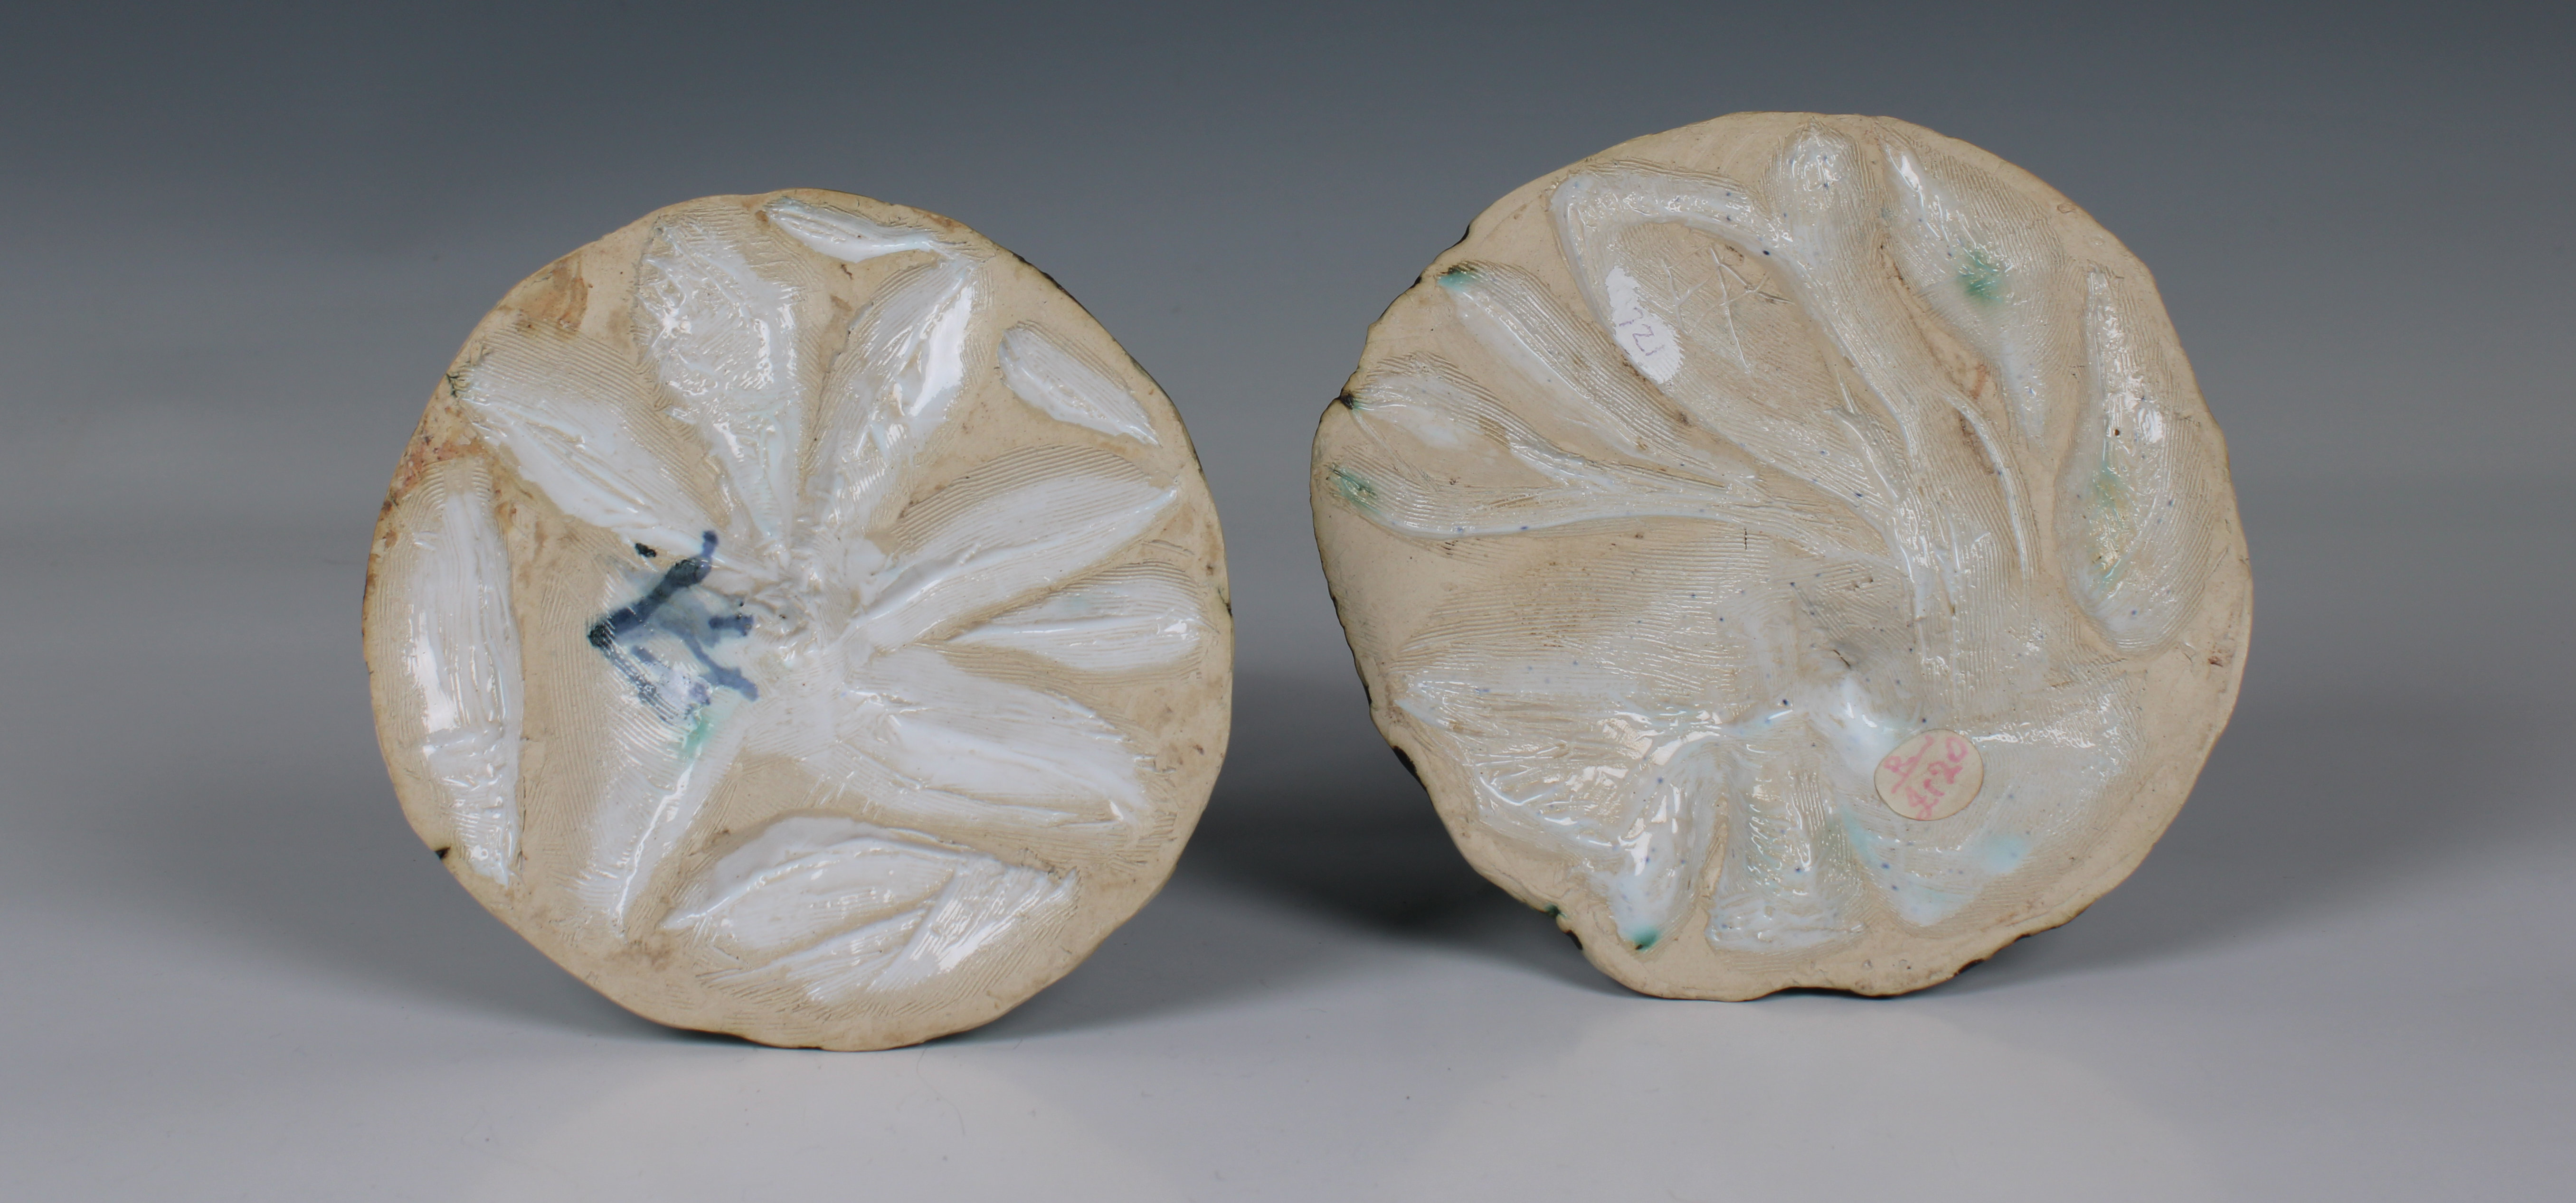 Elizabeth Ann Macphail (1939-89) Two green glazed stylised figural sculptures 'Before & After' - Image 4 of 4